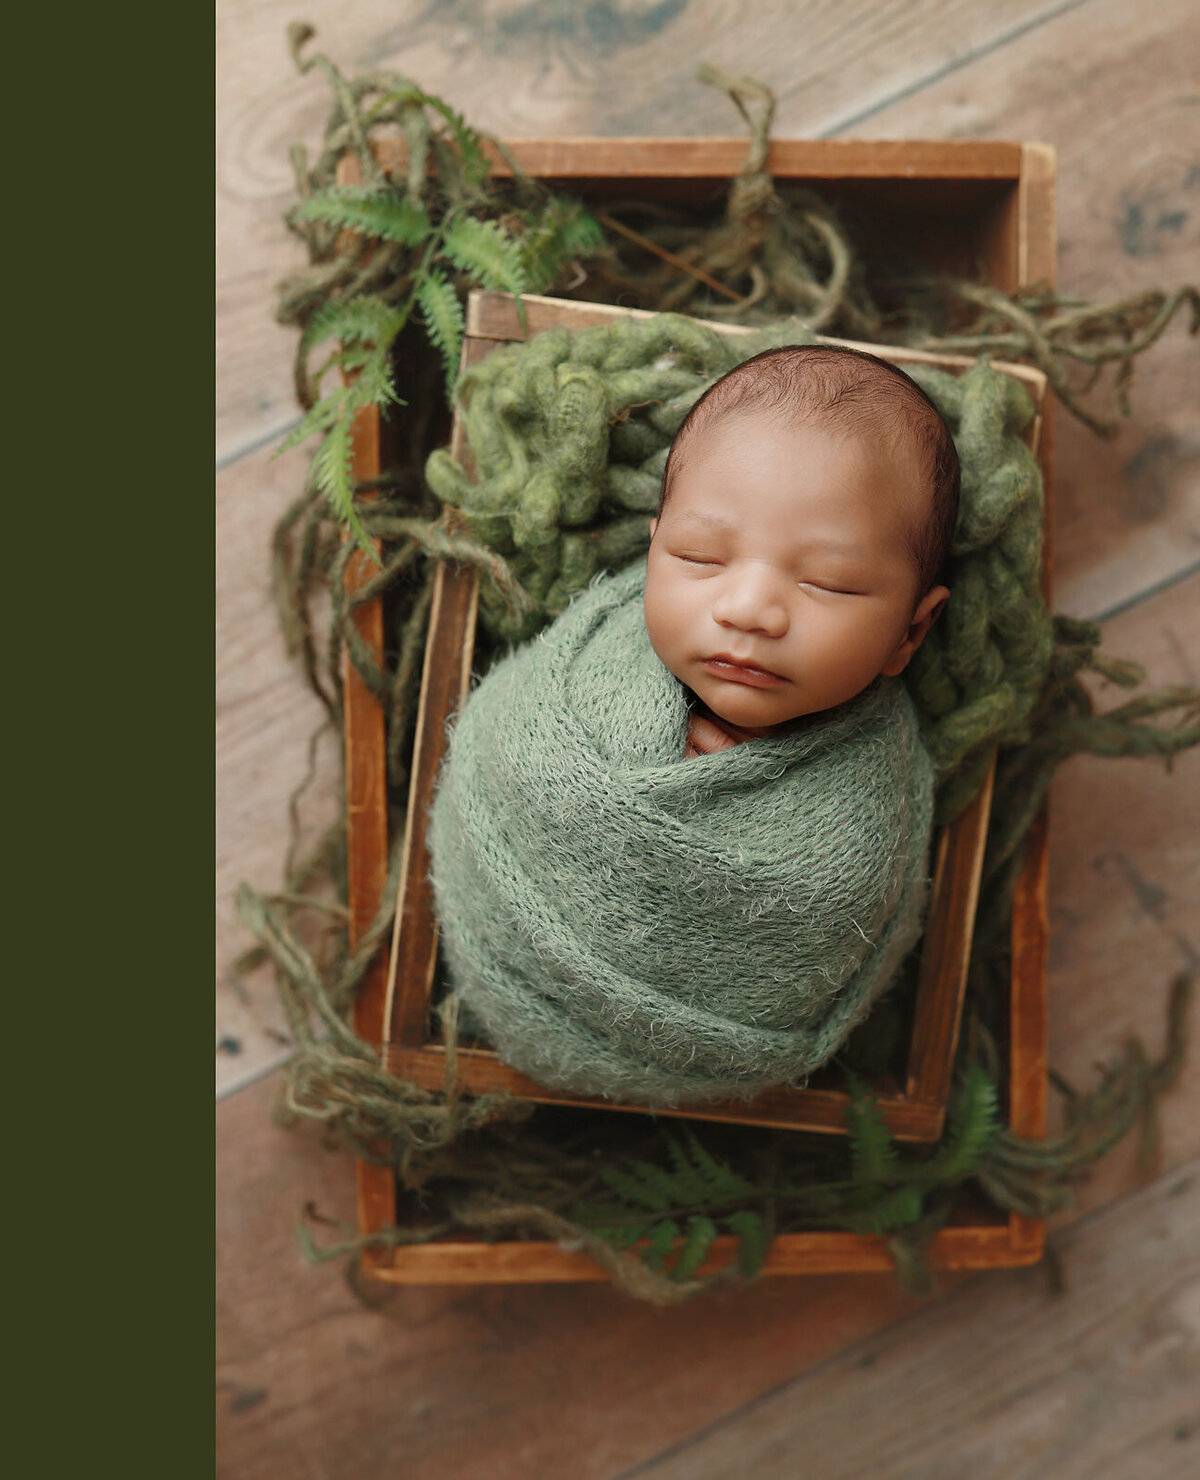 baby boy sleeping in a wooden prop with green ferns